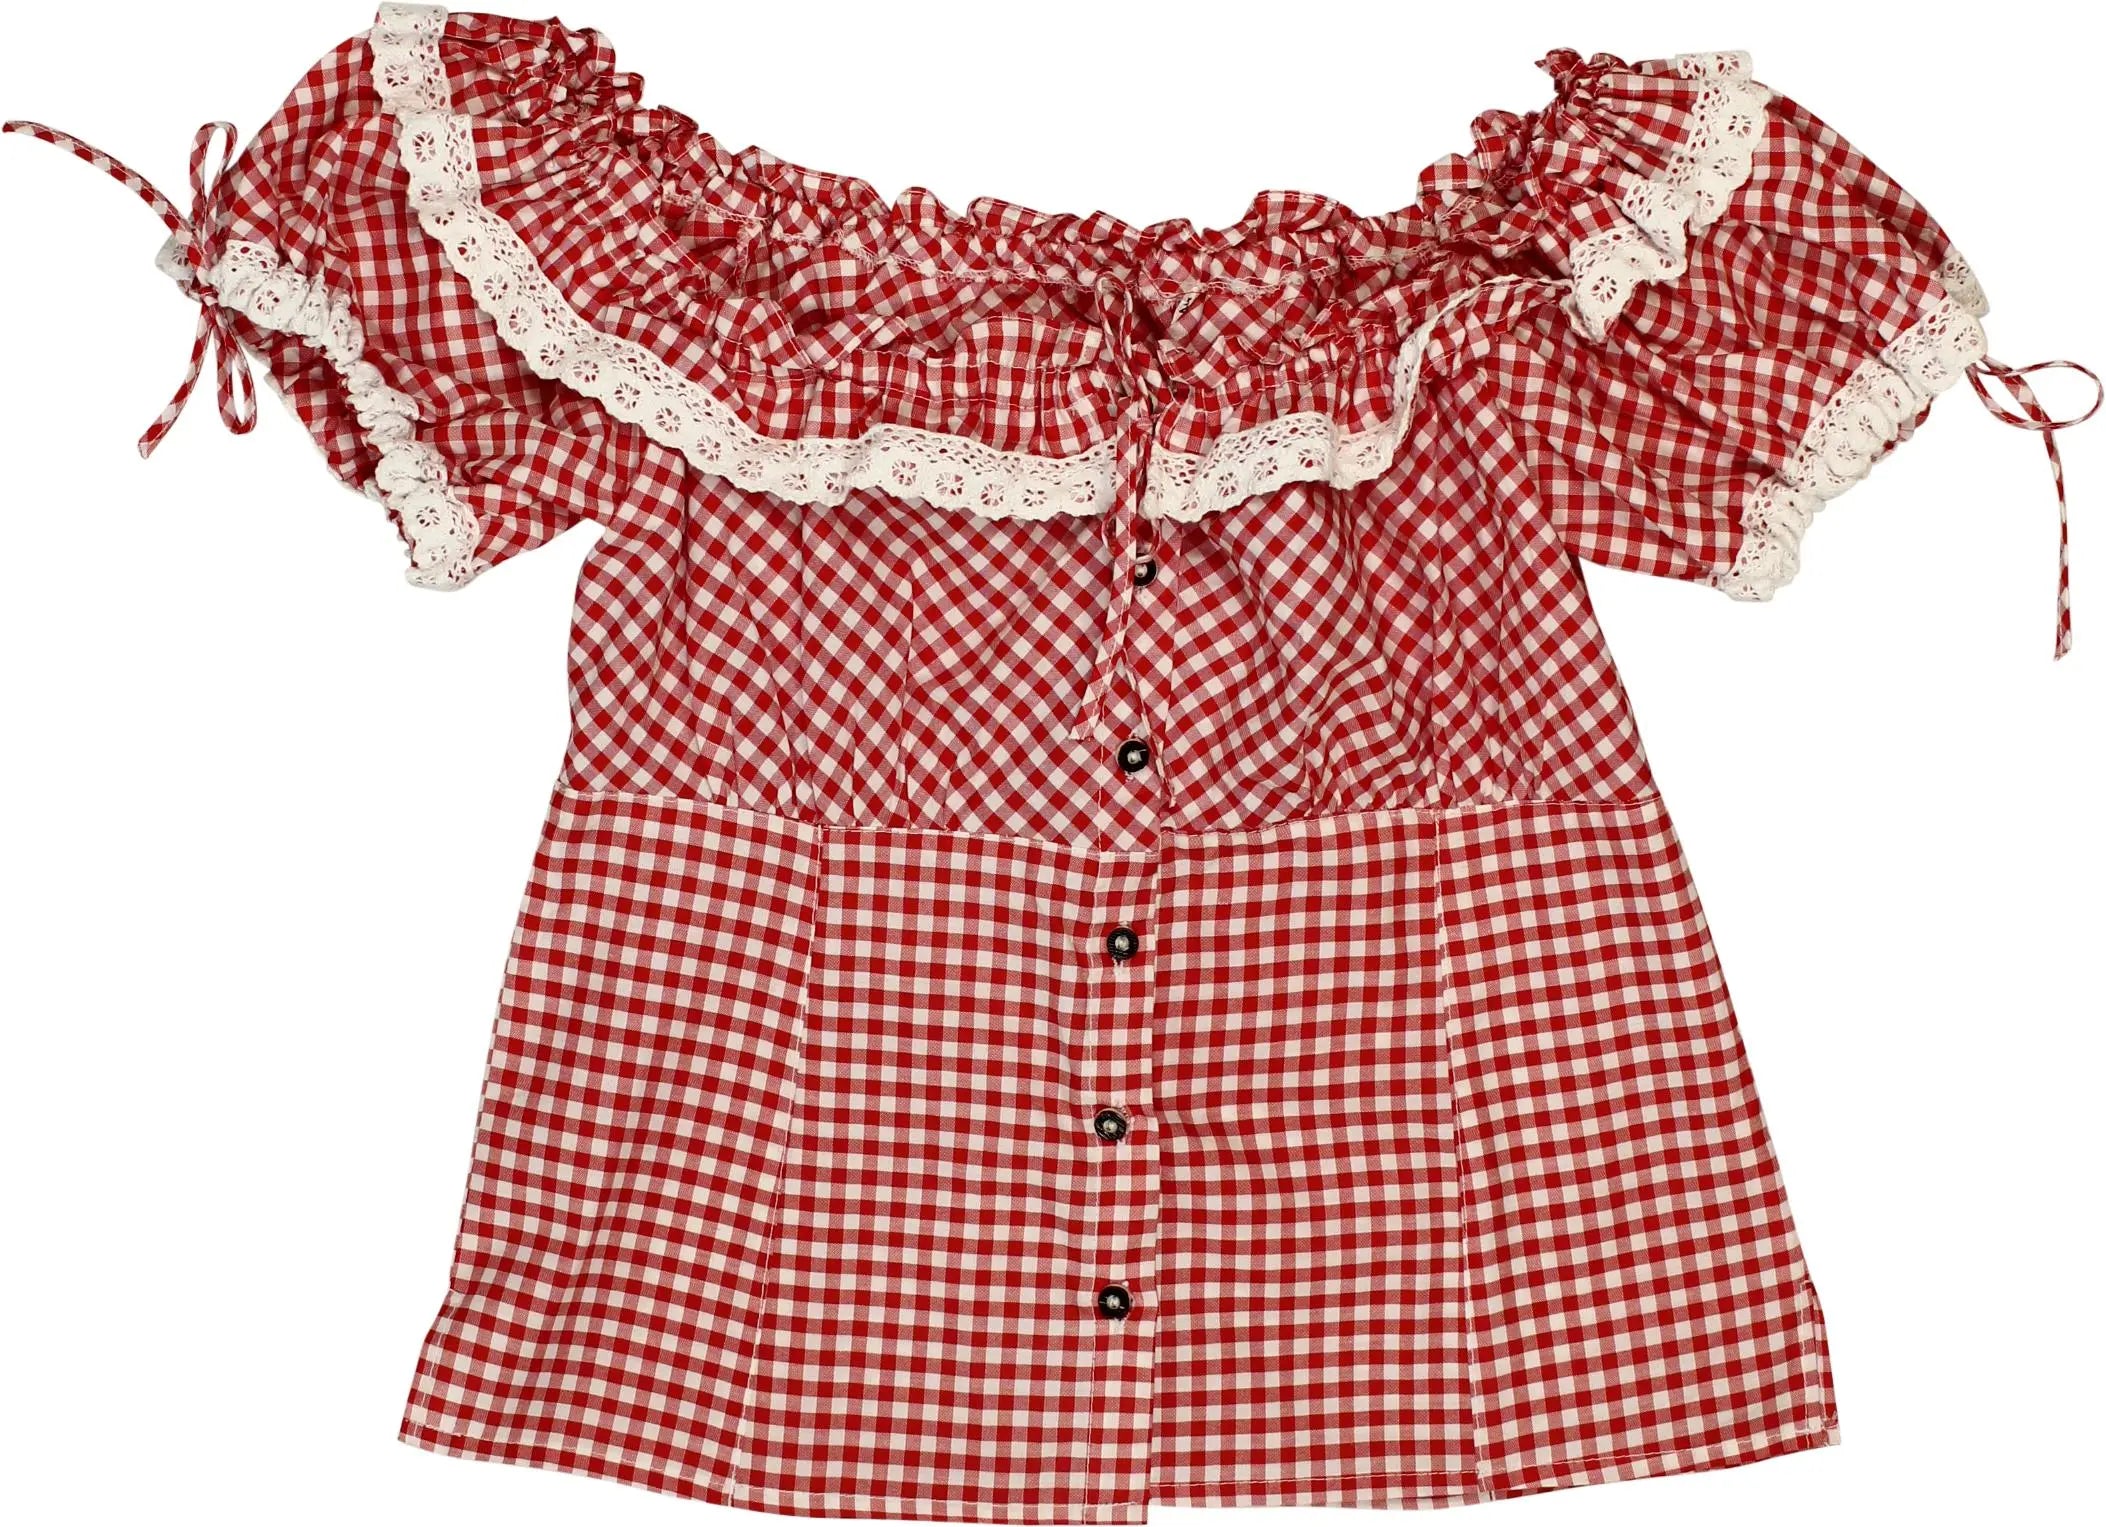 Unknown - Dirndl Top- ThriftTale.com - Vintage and second handclothing